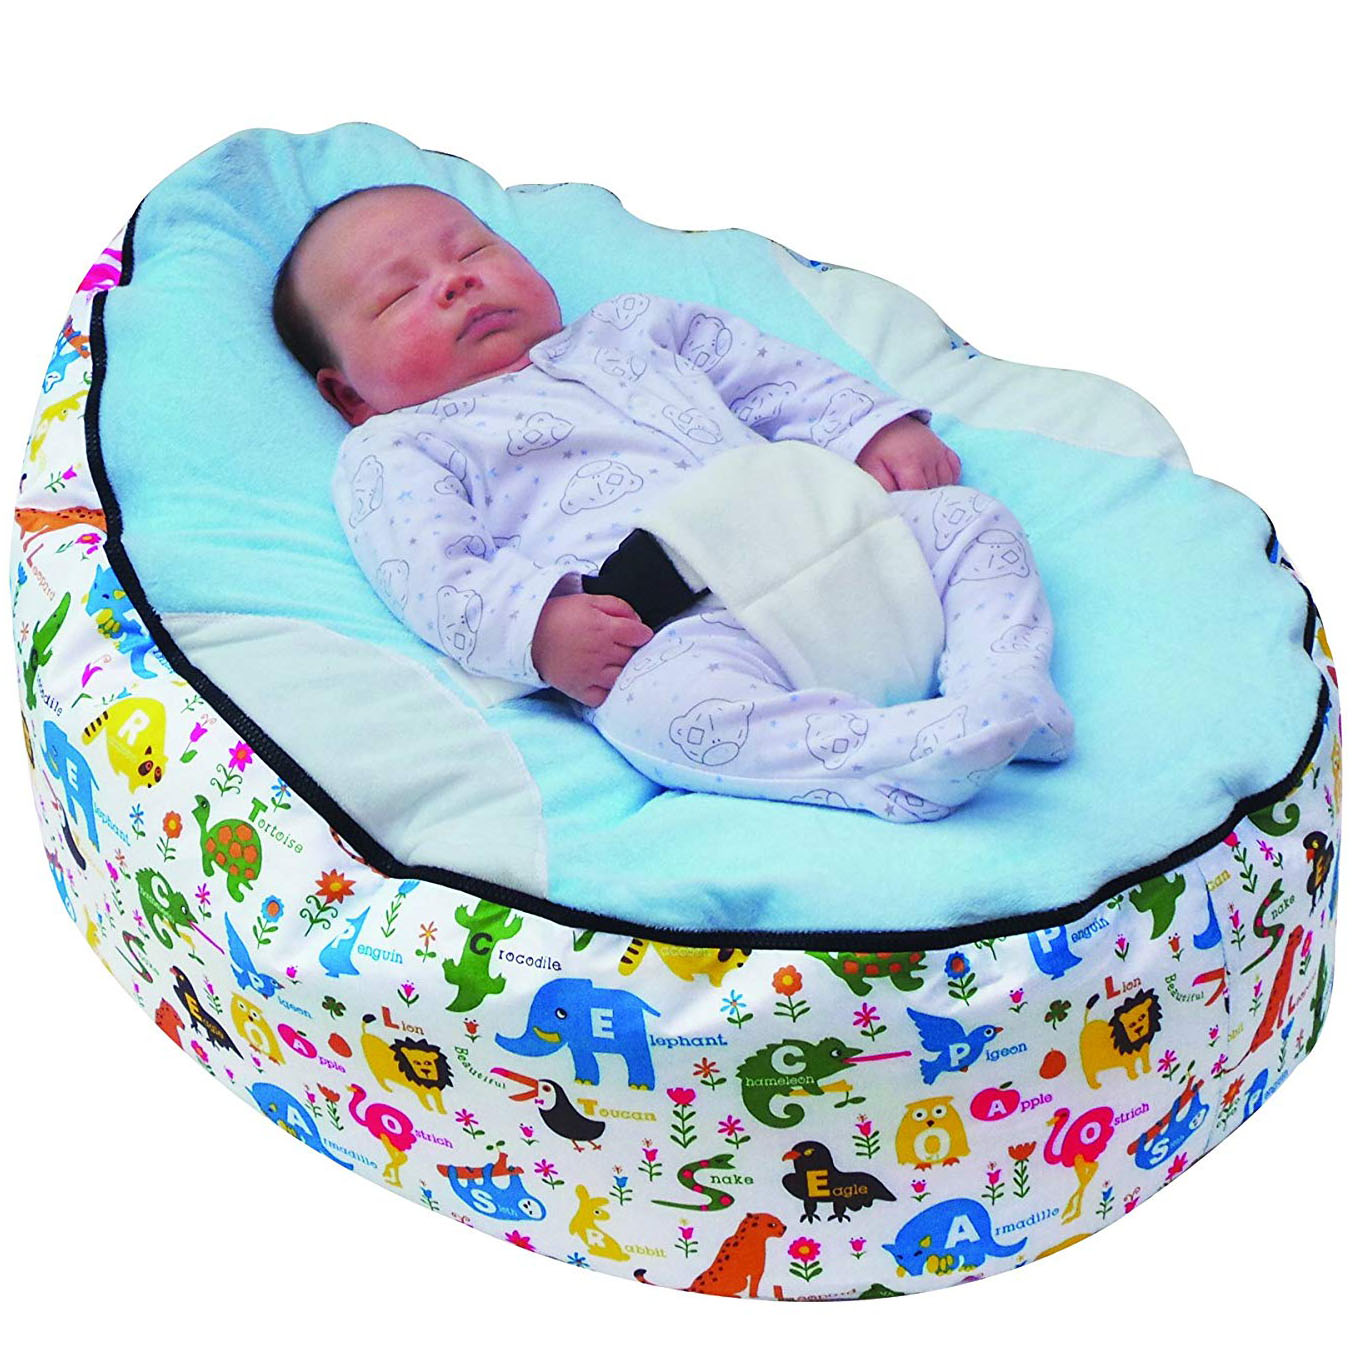 Baby Doll Carry Bed sofa